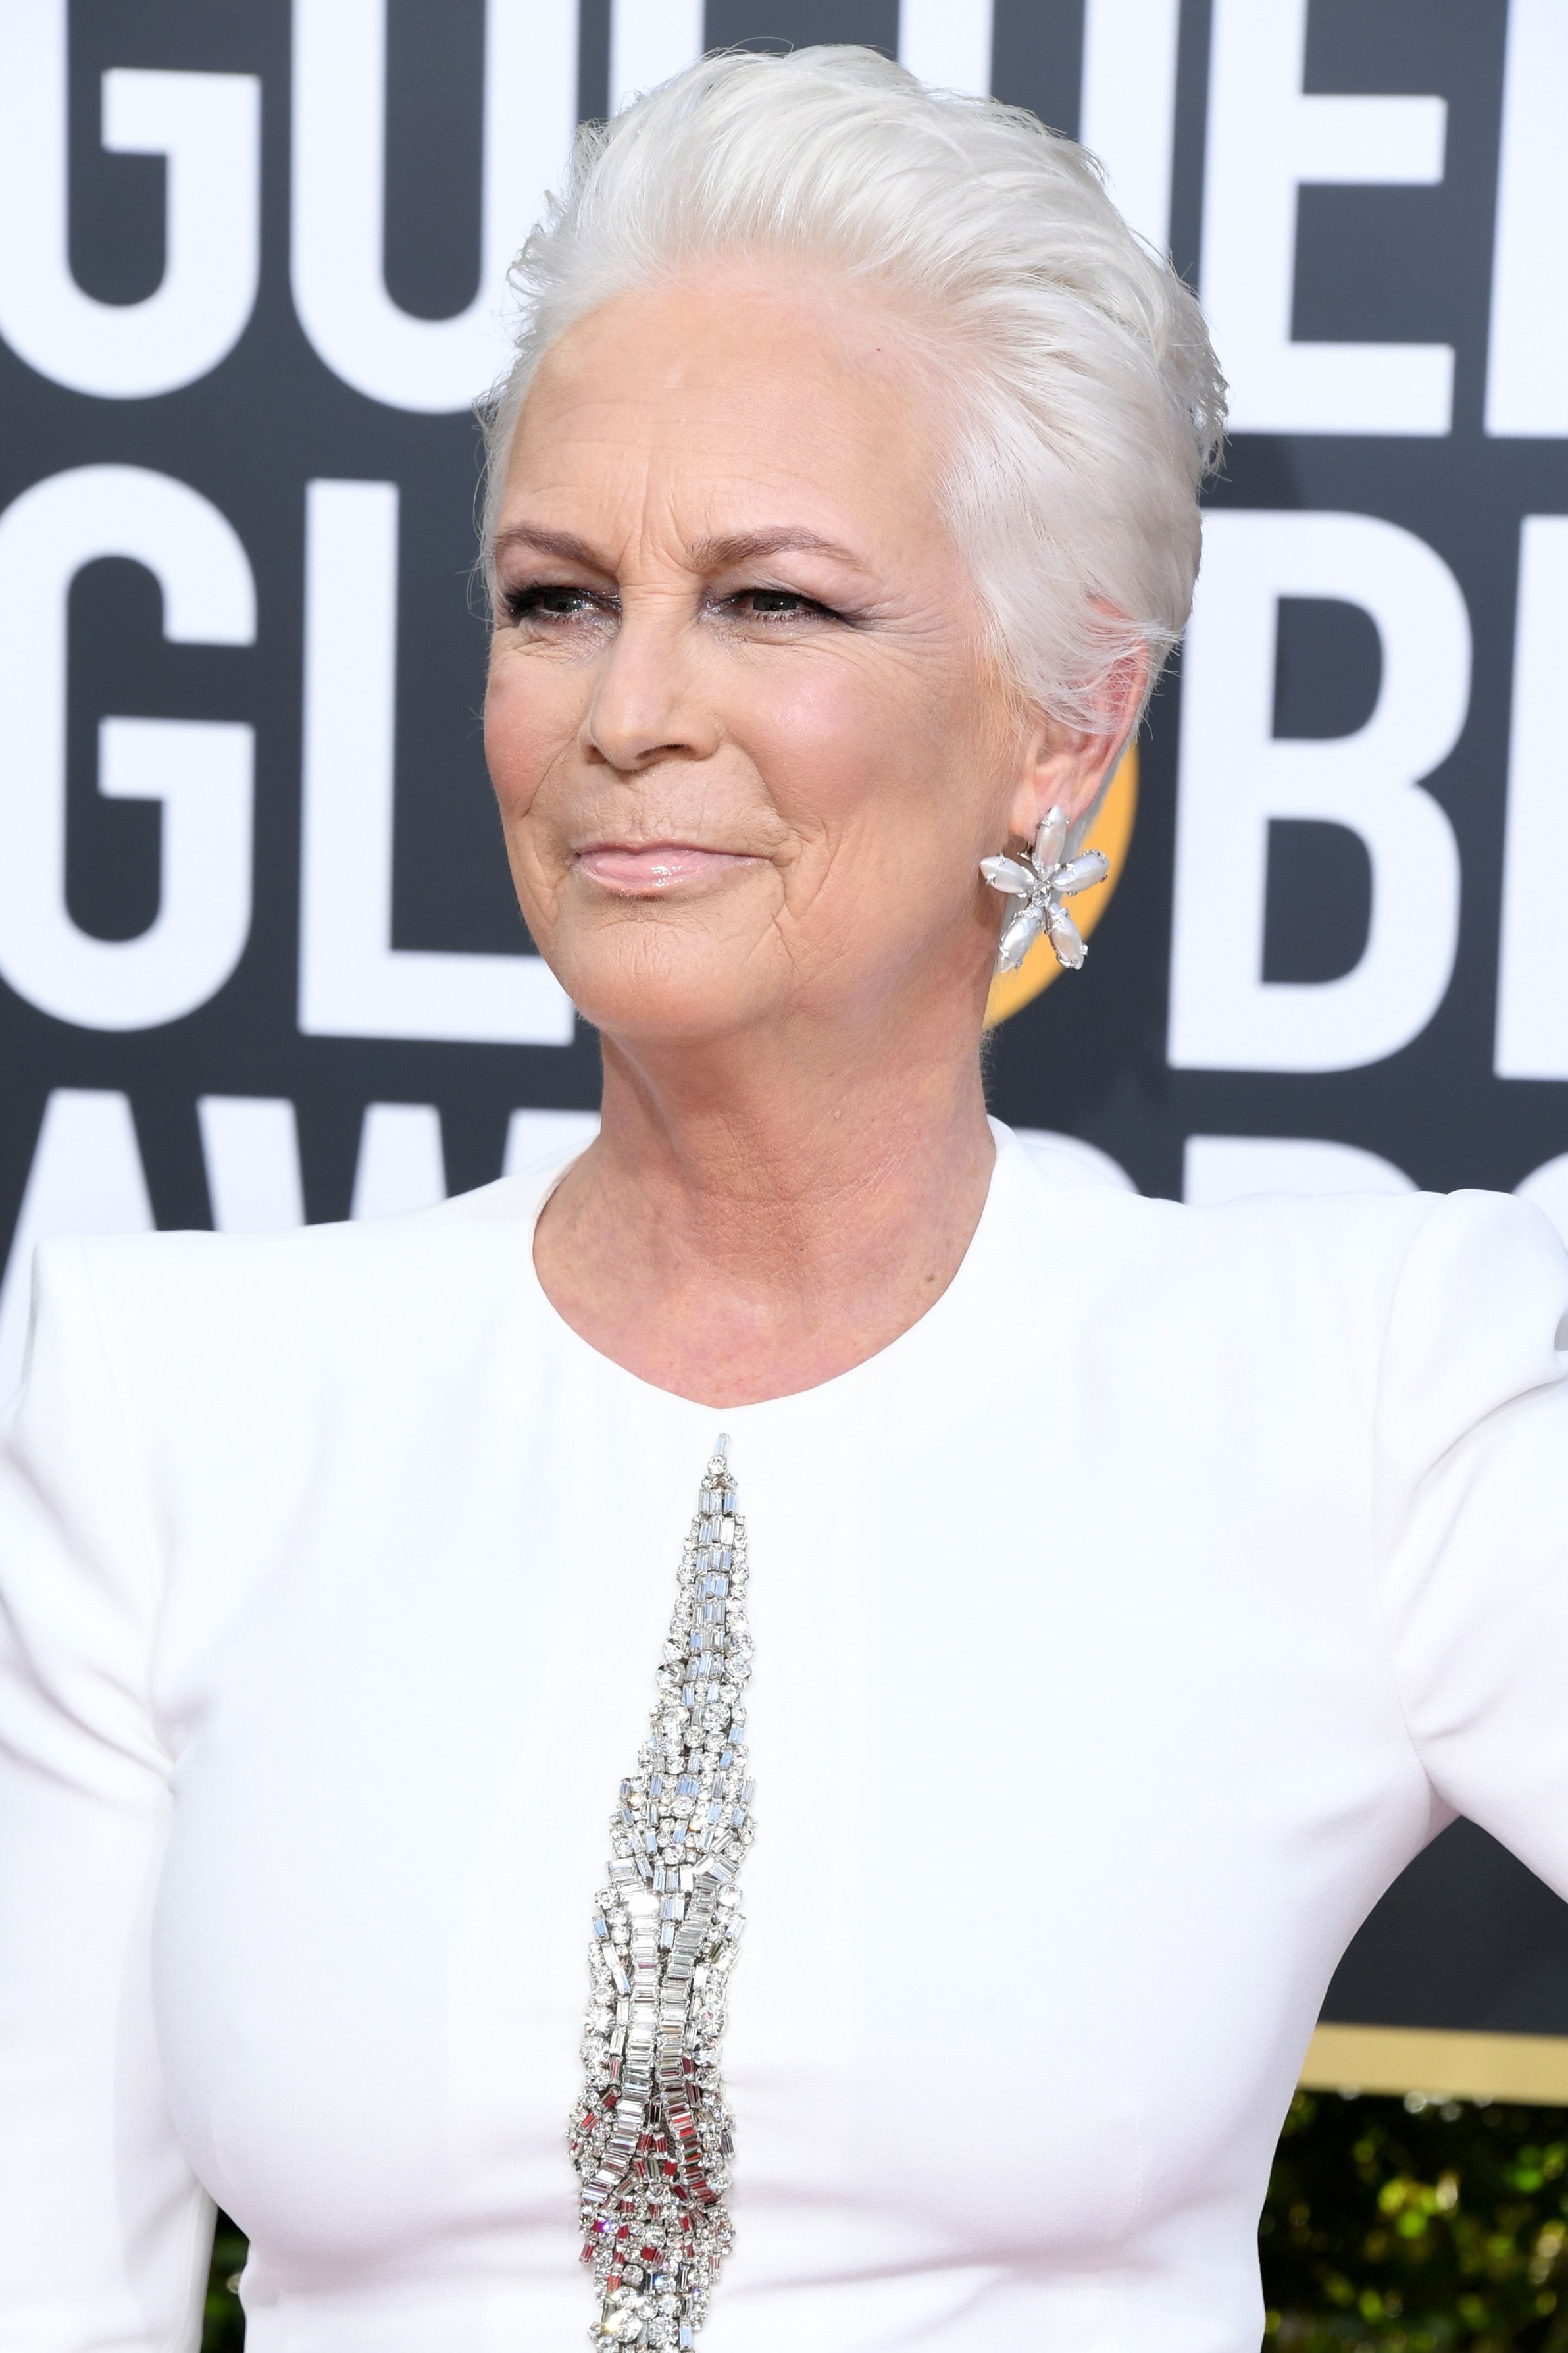  Jamie Lee Curtis at the Golden Globe Awards at The Beverly Hilton Hotel on January 6, 2019 | Photo: Getty Images 